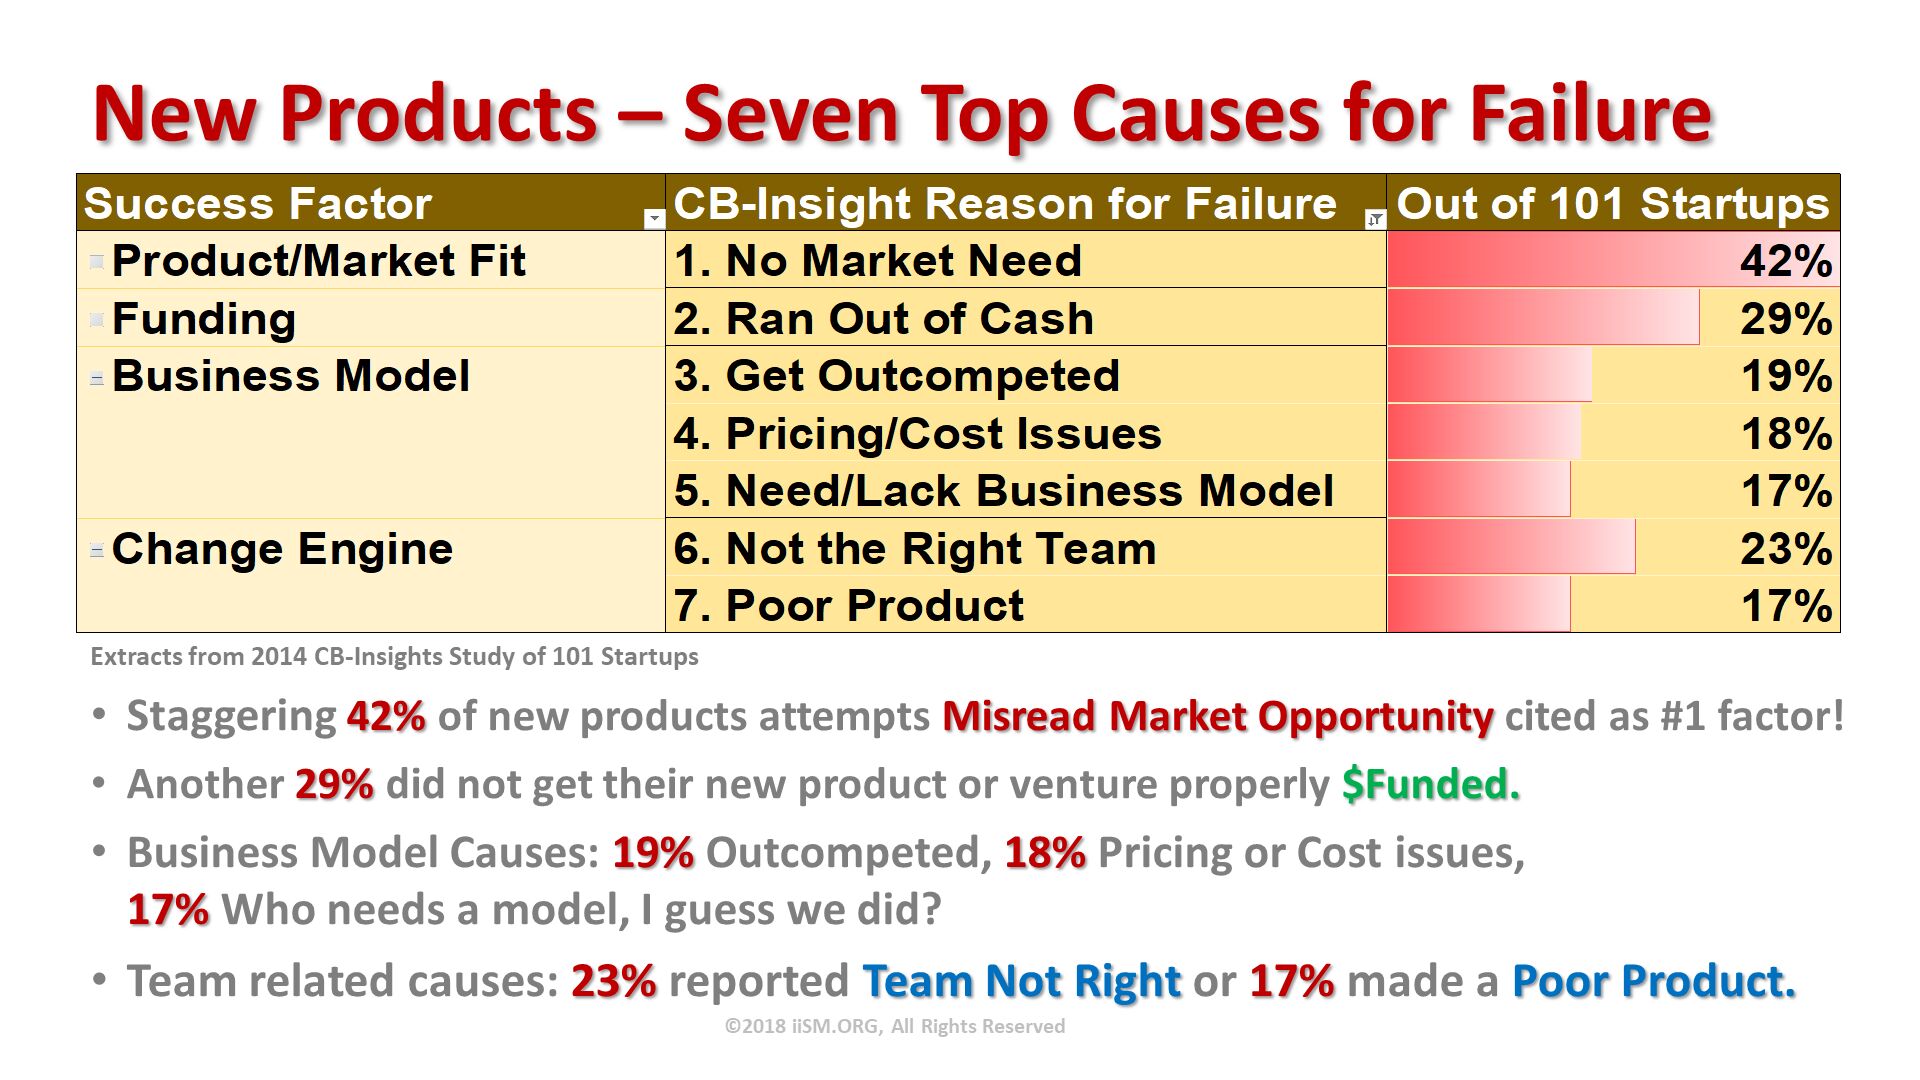 New Products – Seven Top Causes for Failure. Staggering 42% of new products attempts Misread Market Opportunity cited as #1 factor!
Another 29% did not get their new product or venture properly $Funded.
Business Model Causes: 19% Outcompeted, 18% Pricing or Cost issues, 17% Who needs a model, I guess we did? 
Team related causes: 23% reported Team Not Right or 17% made a Poor Product.


. ©2018 iiSM.ORG, All Rights Reserved. Extracts from 2014 CB-Insights Study of 101 Startups . 